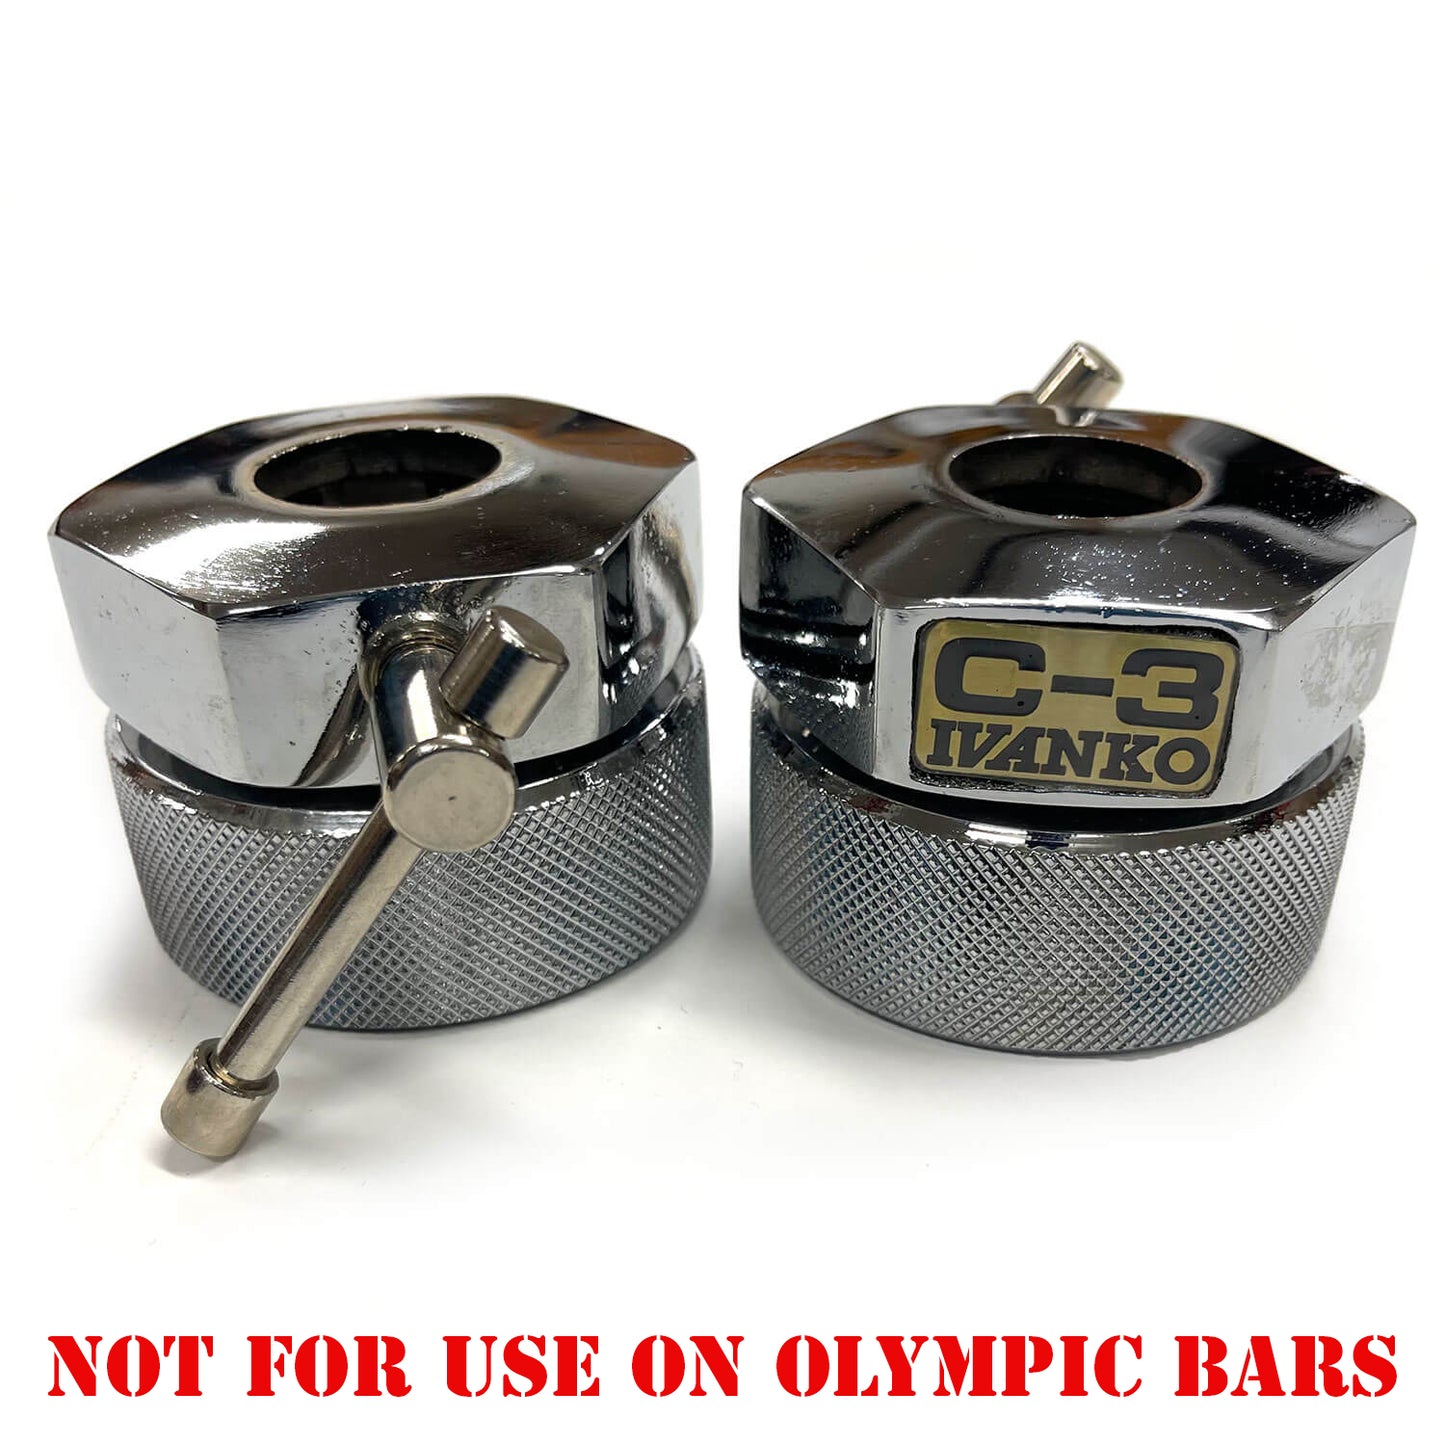 Ivanko-CC-3-compression-ring-no-for-olympic-bar